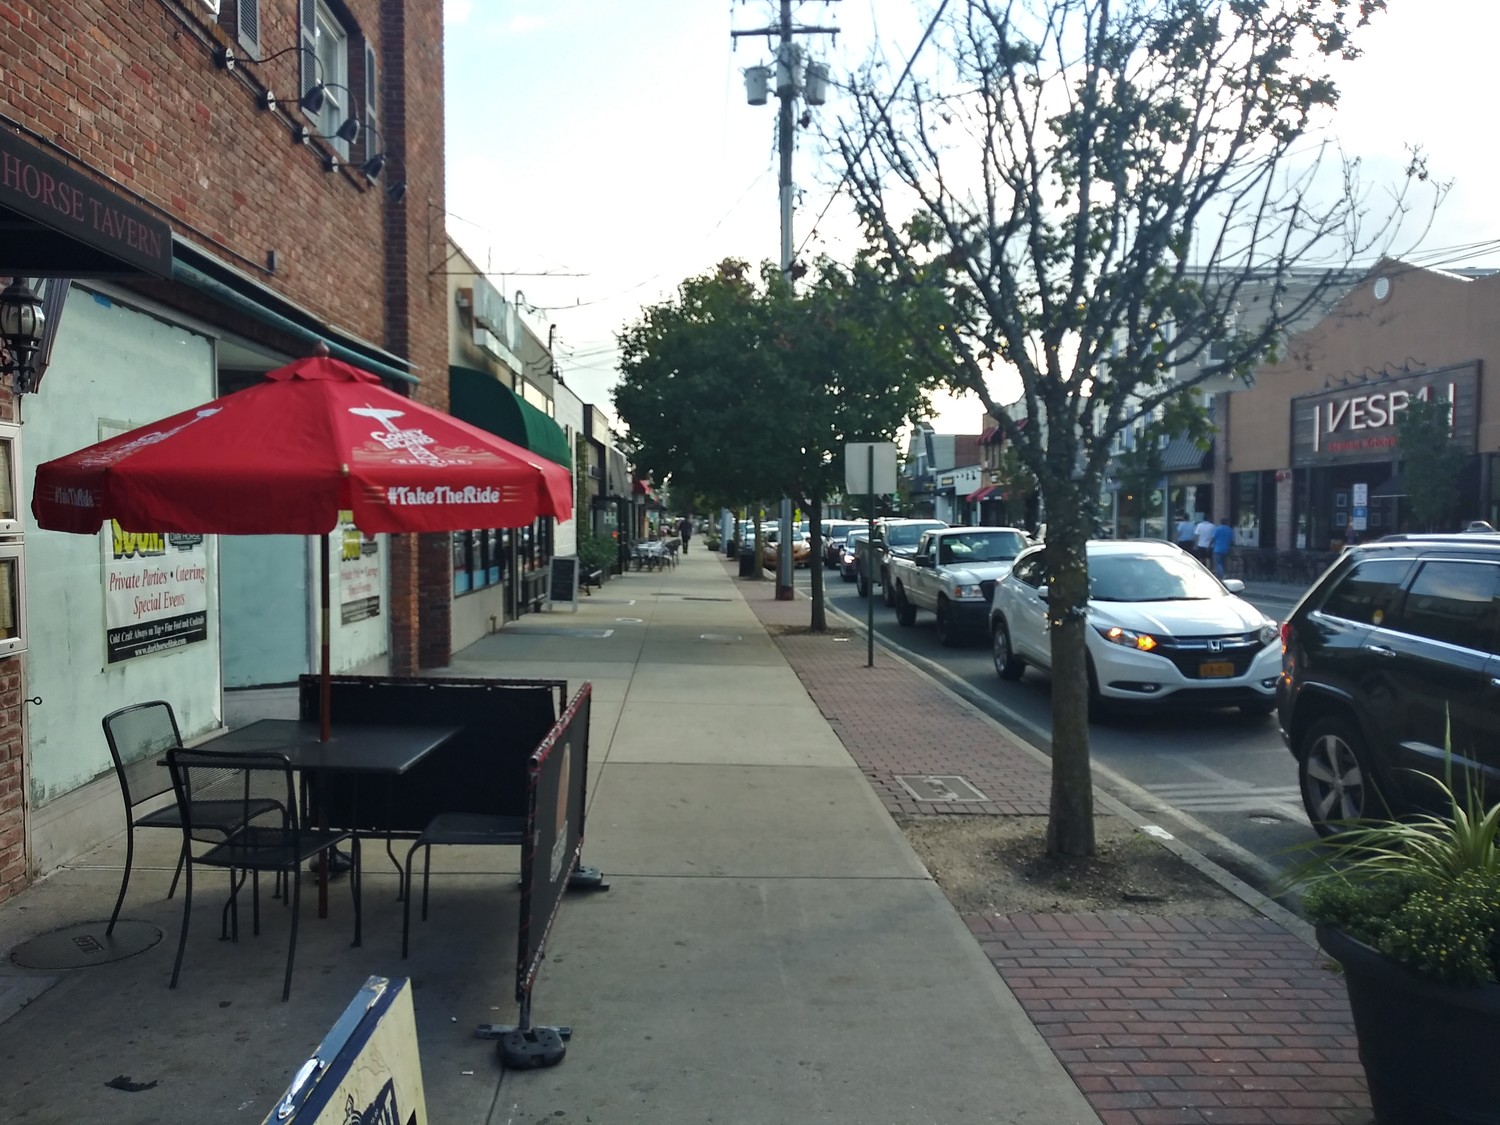 The Village of Farmingdale’s Main Street is filled with restaurants, bars and more, though it looked more like Grand Avenue just a few years ago.